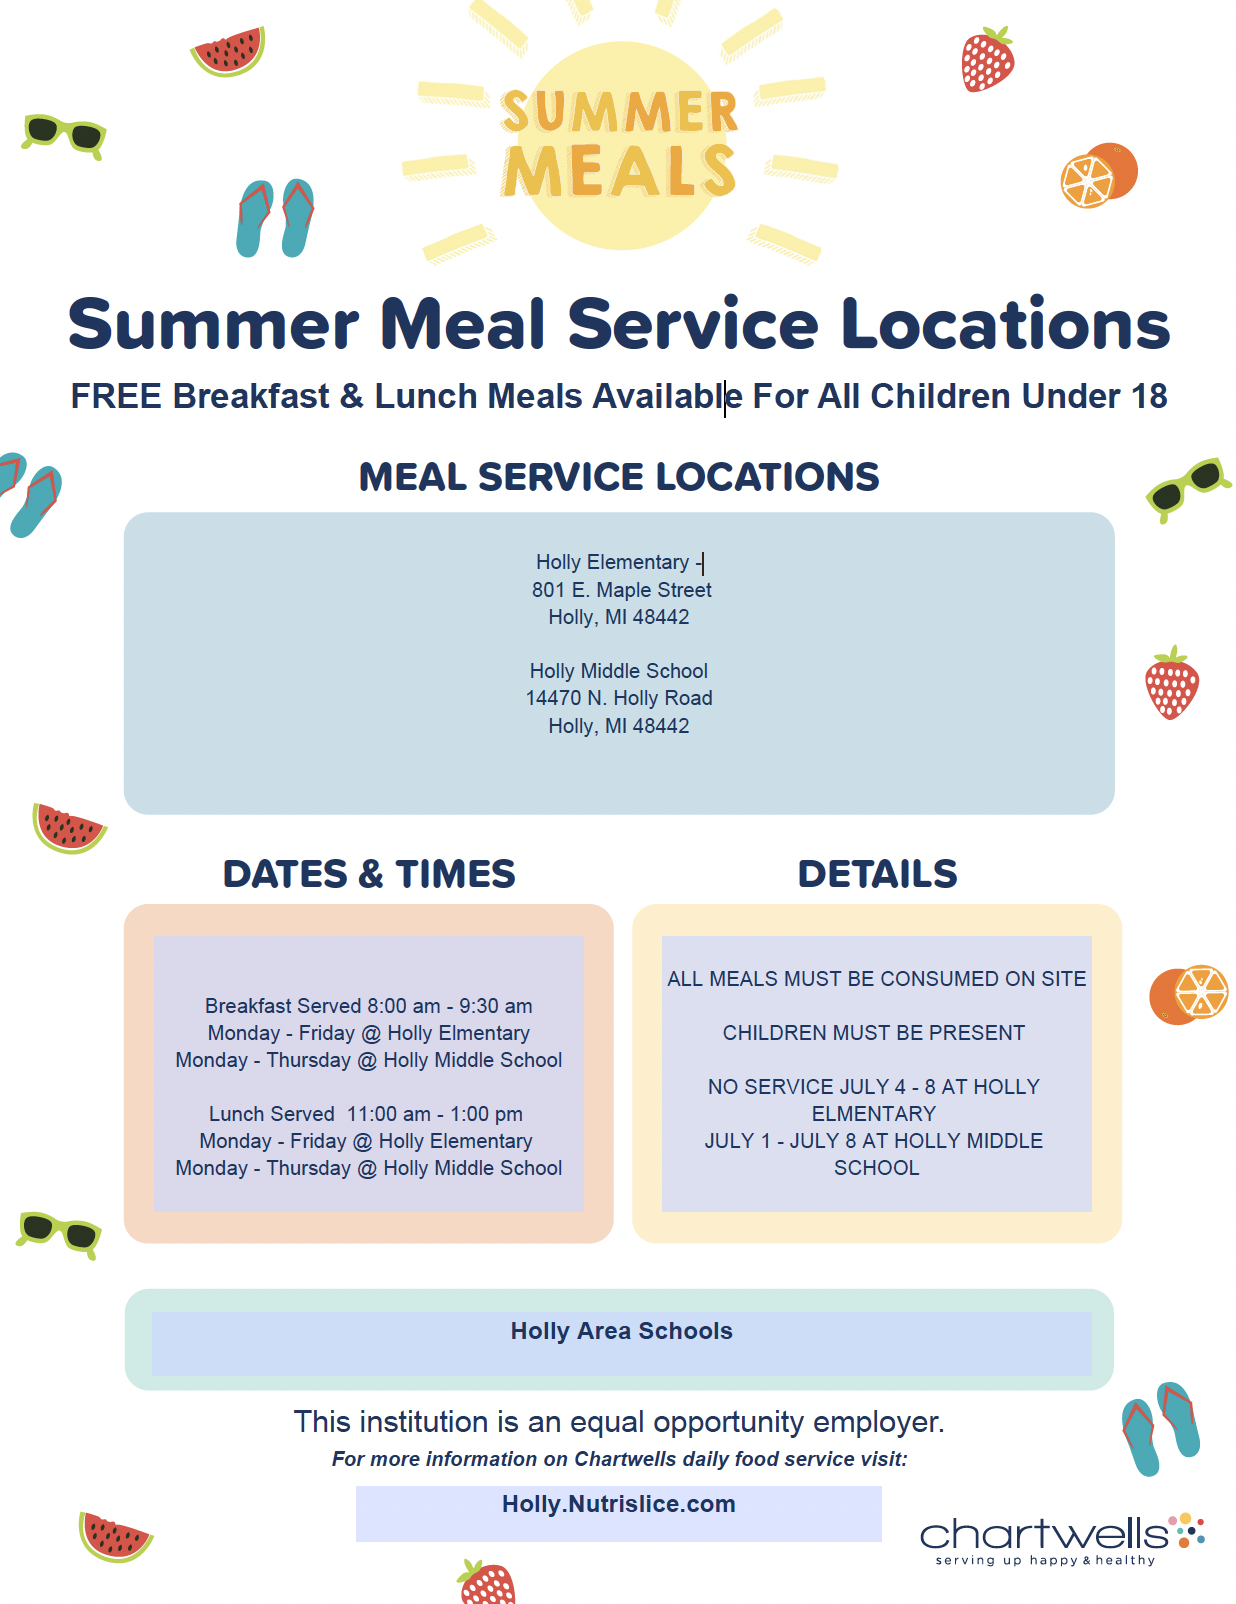 Summer Meal Service Locations - Summer 2022 image